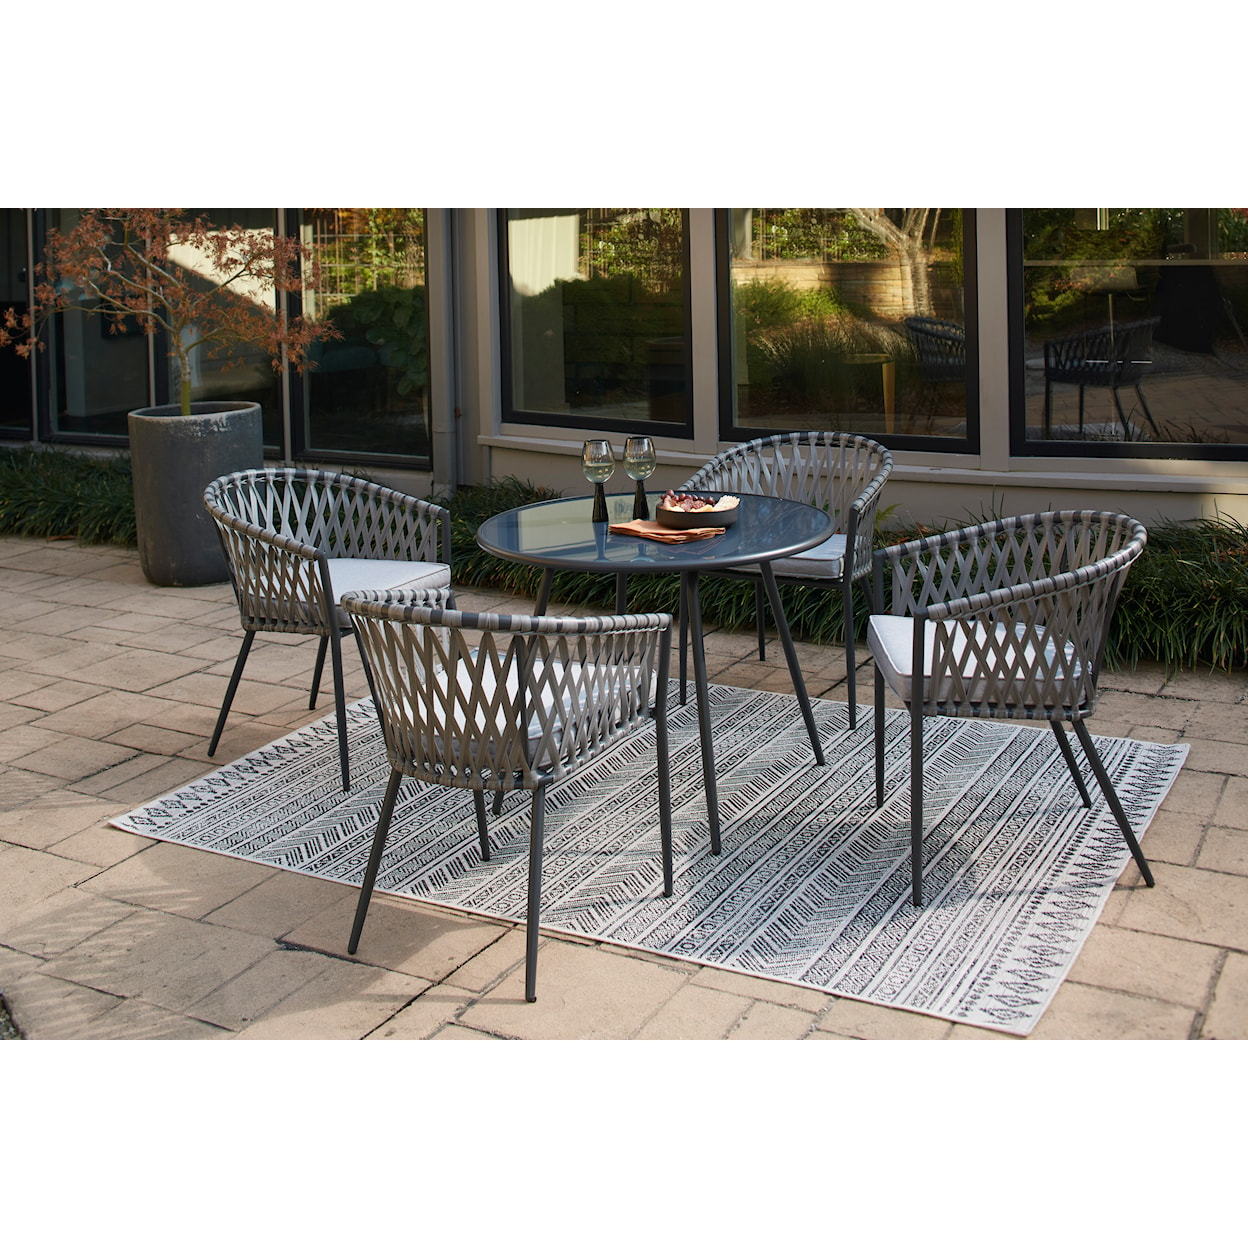 Ashley Furniture Signature Design Palm Bliss Outdoor Dining Chair (Set of 4)